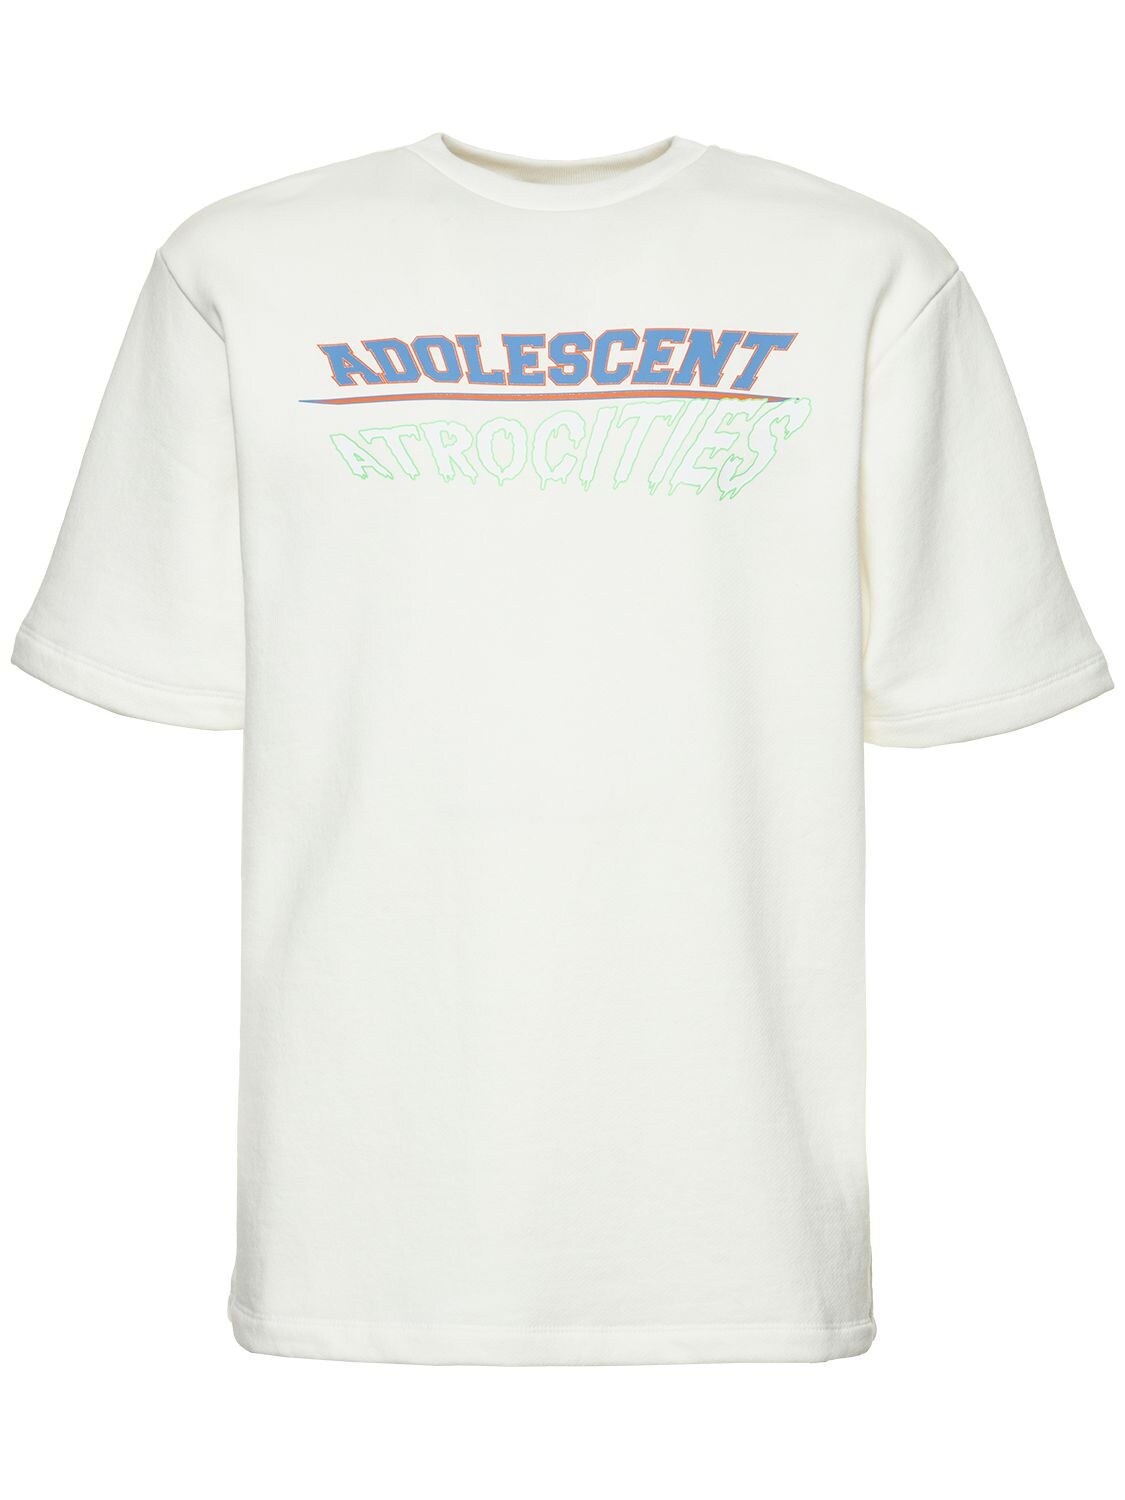 T-shirt Adolescent In Jersey Pesante - LIBERAL YOUTH MINISTRY - Modalova